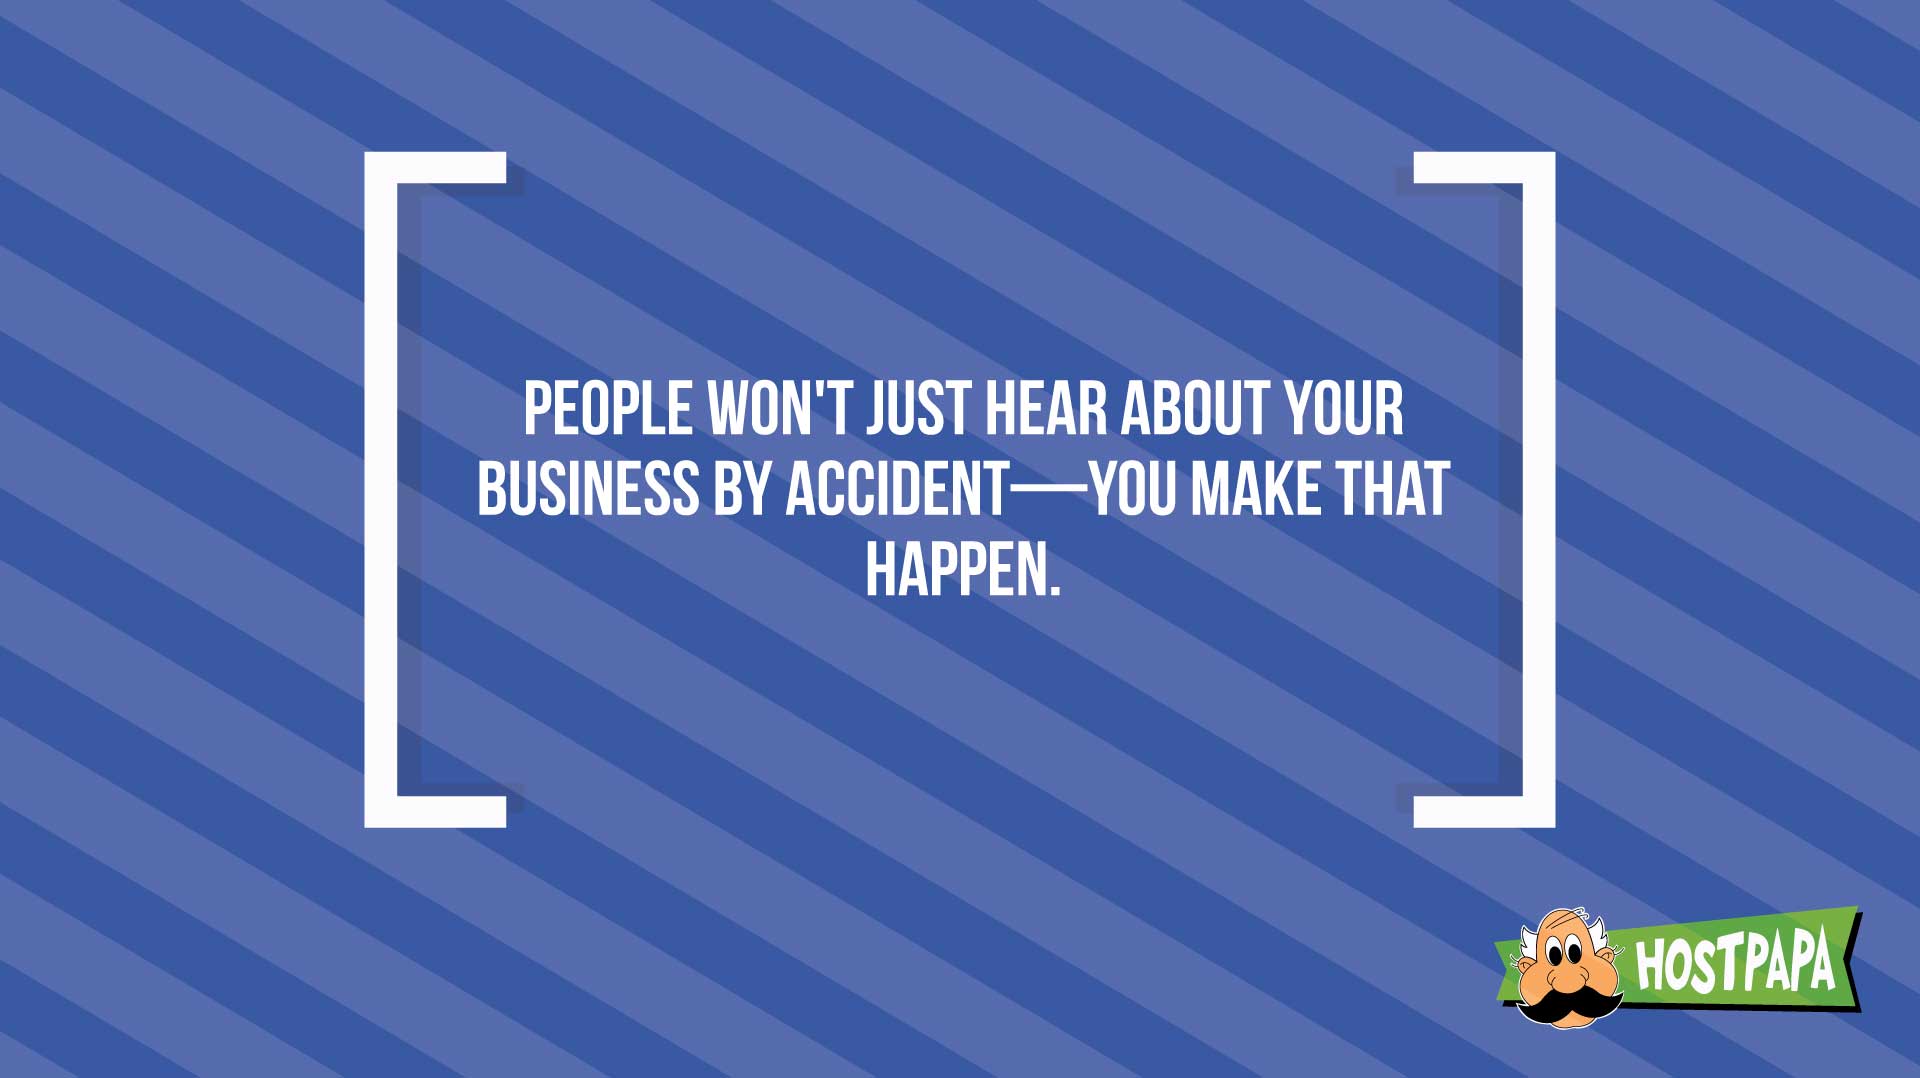 People won't just hear about your business by accident- you make that happen